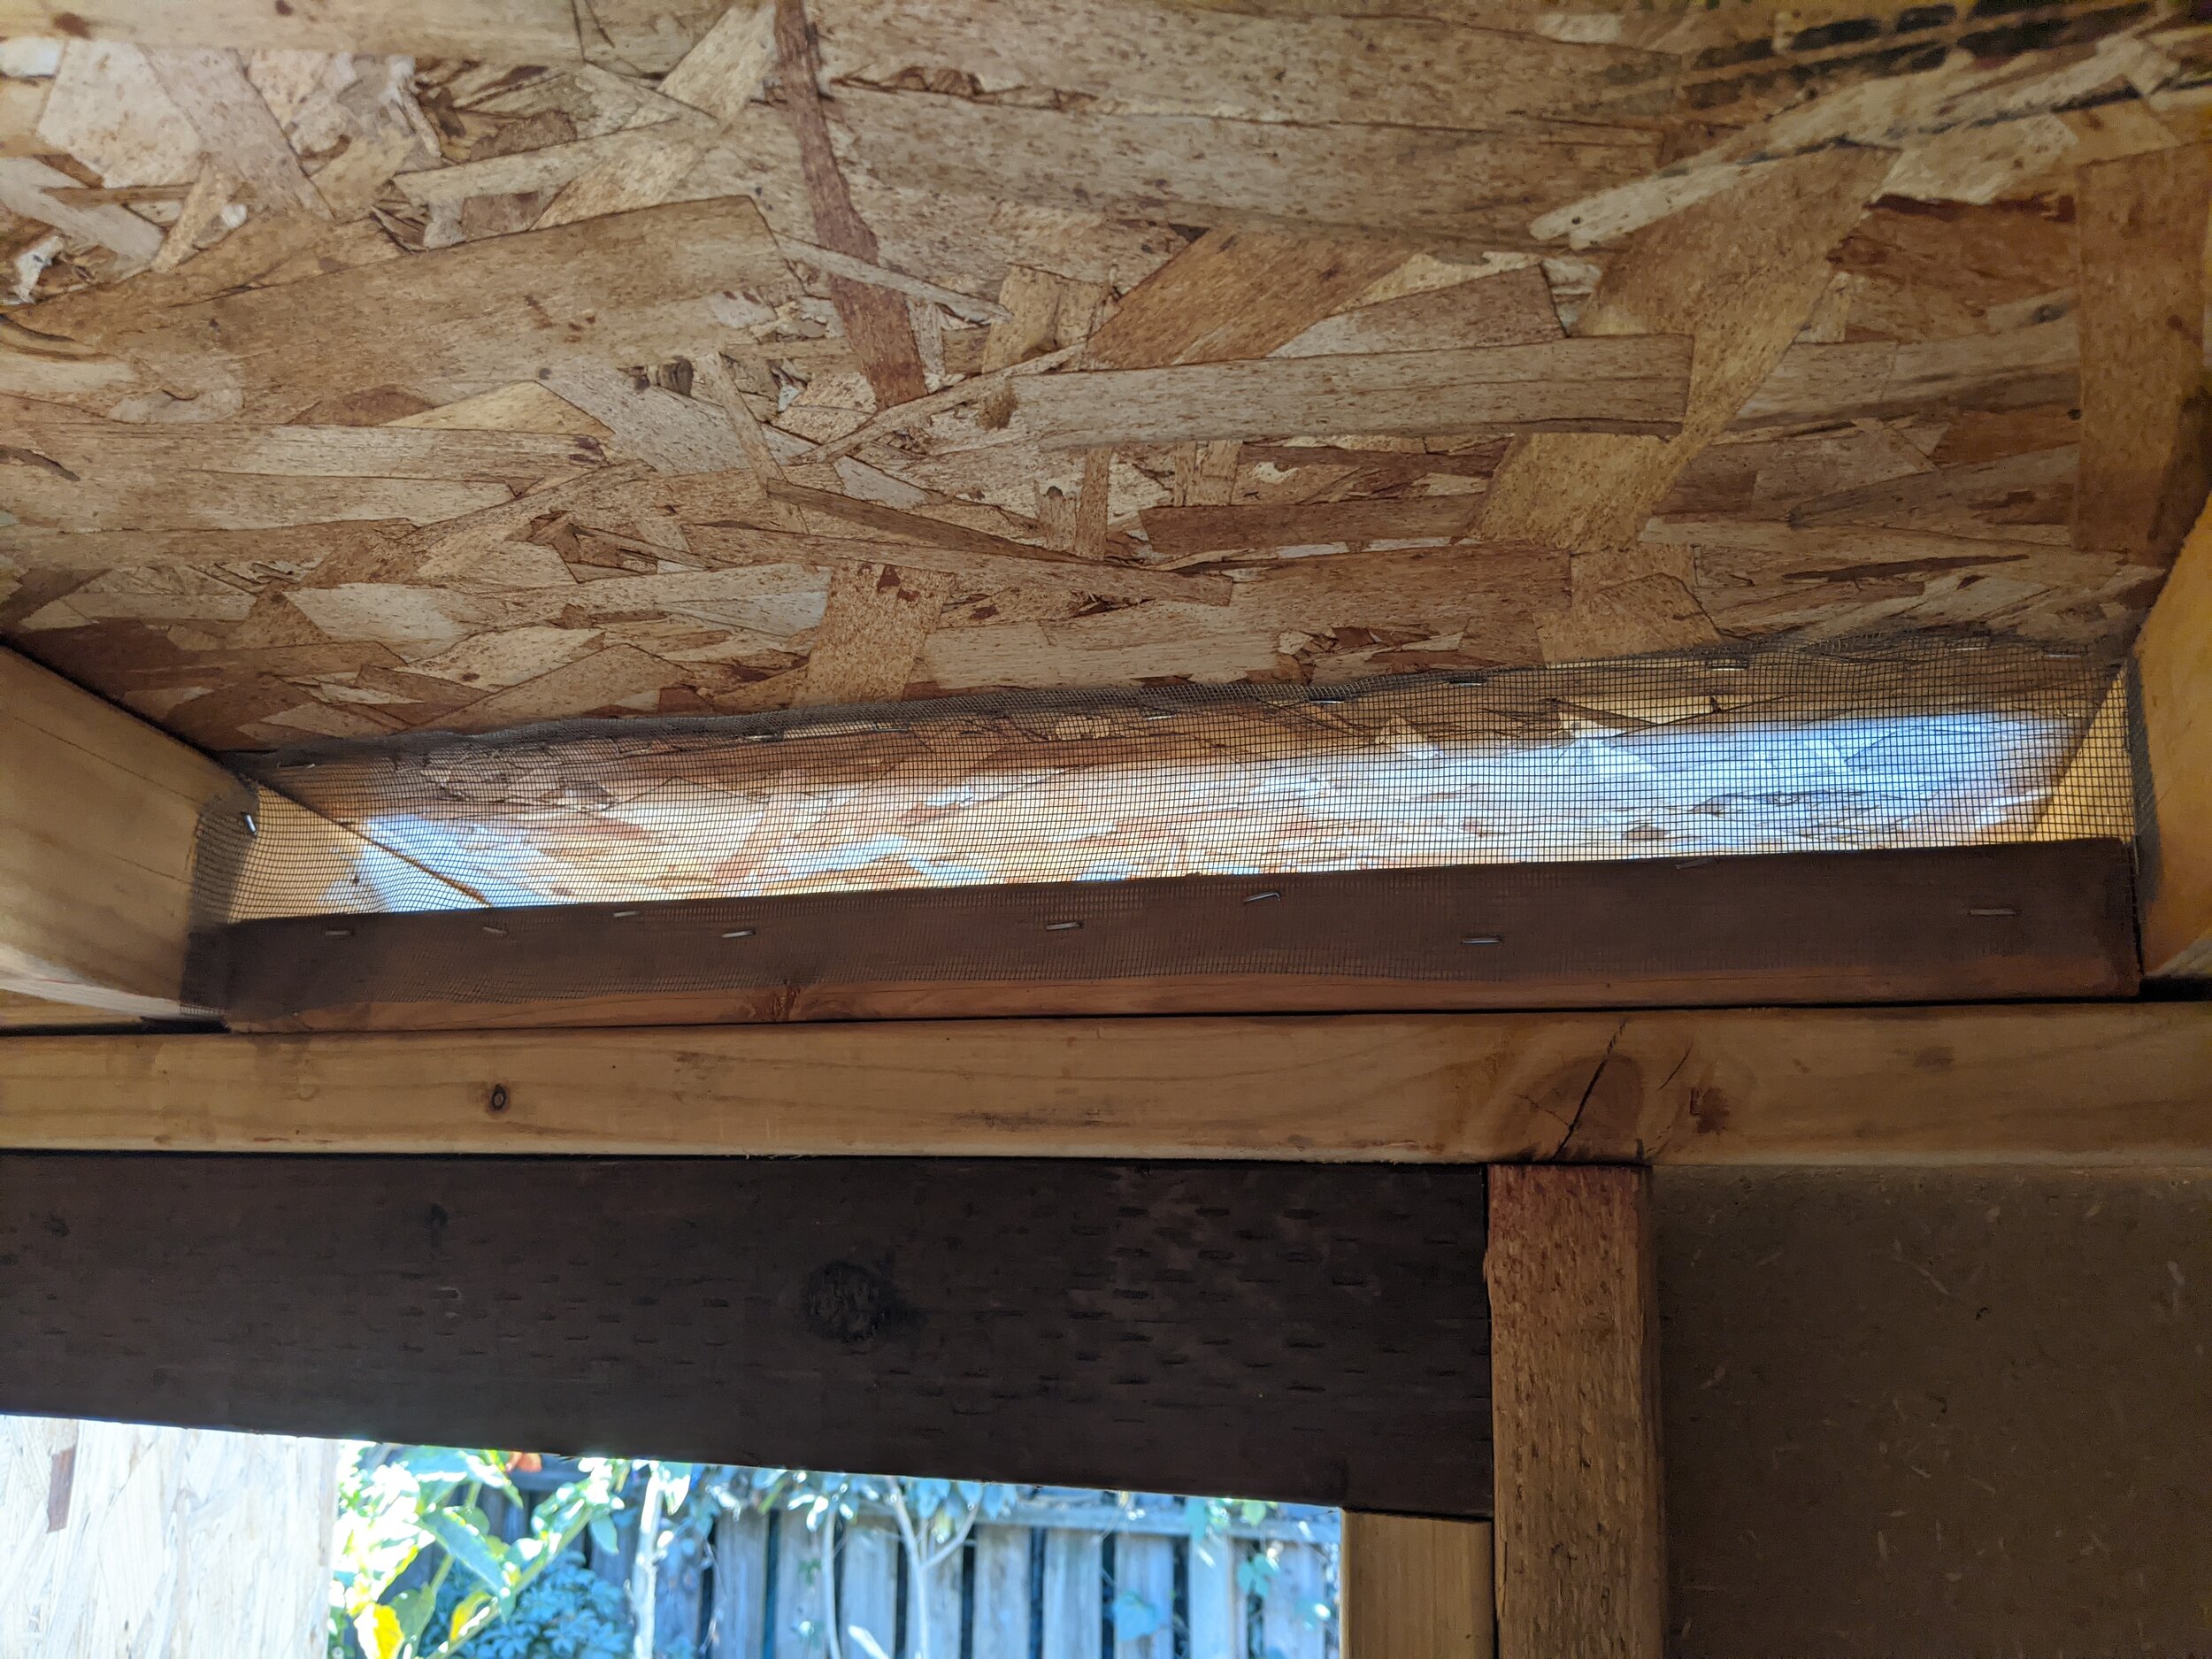  I decided to leave these gaps between the roof and walls to promote airflow, but stapled in door screen material to prevent critters from getting inside. 